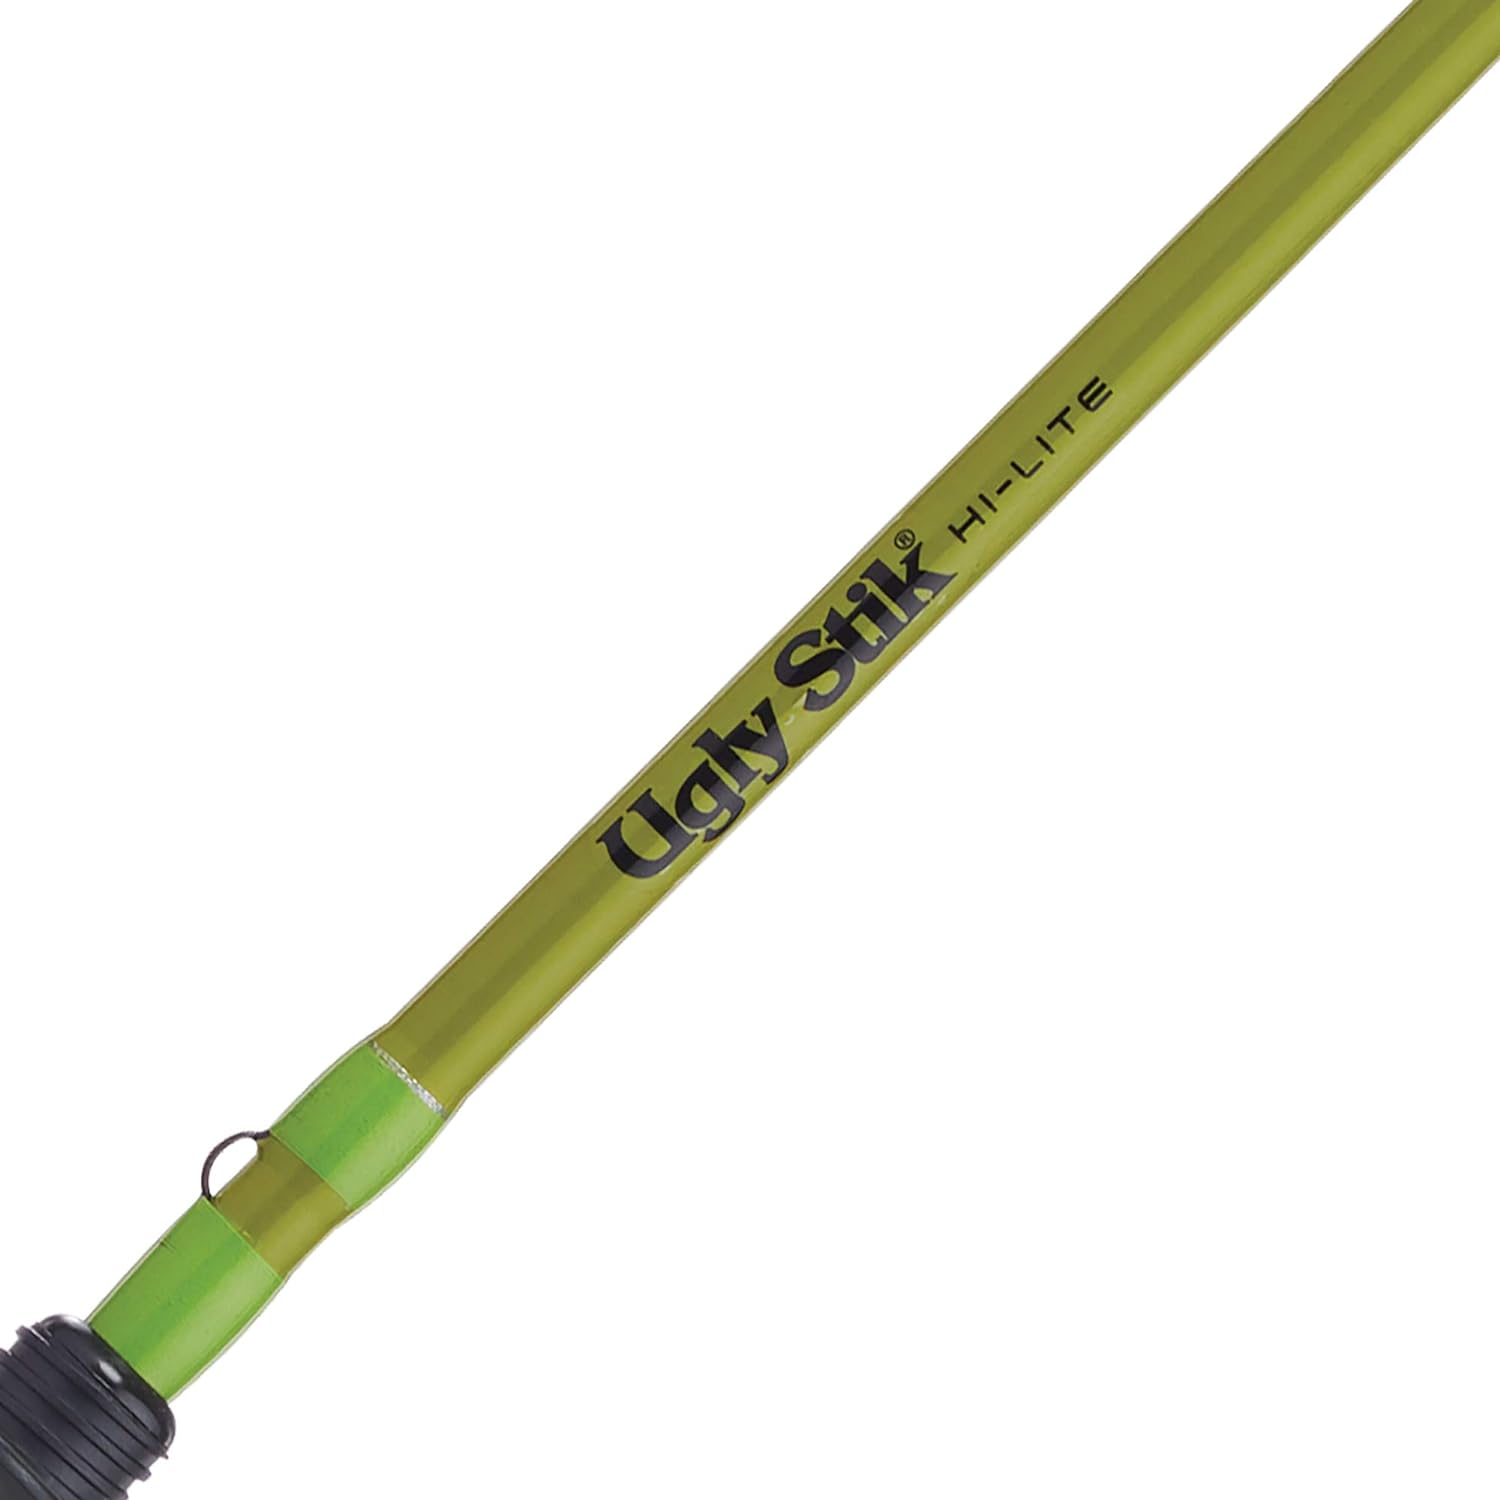 Ugly Stik 6 Hi-Lite Spincast Fishing Rod And Reel Combo, 2-Piece Graphite  Fiberglass Rod, Durable And Strong, Right/Left Handle Position